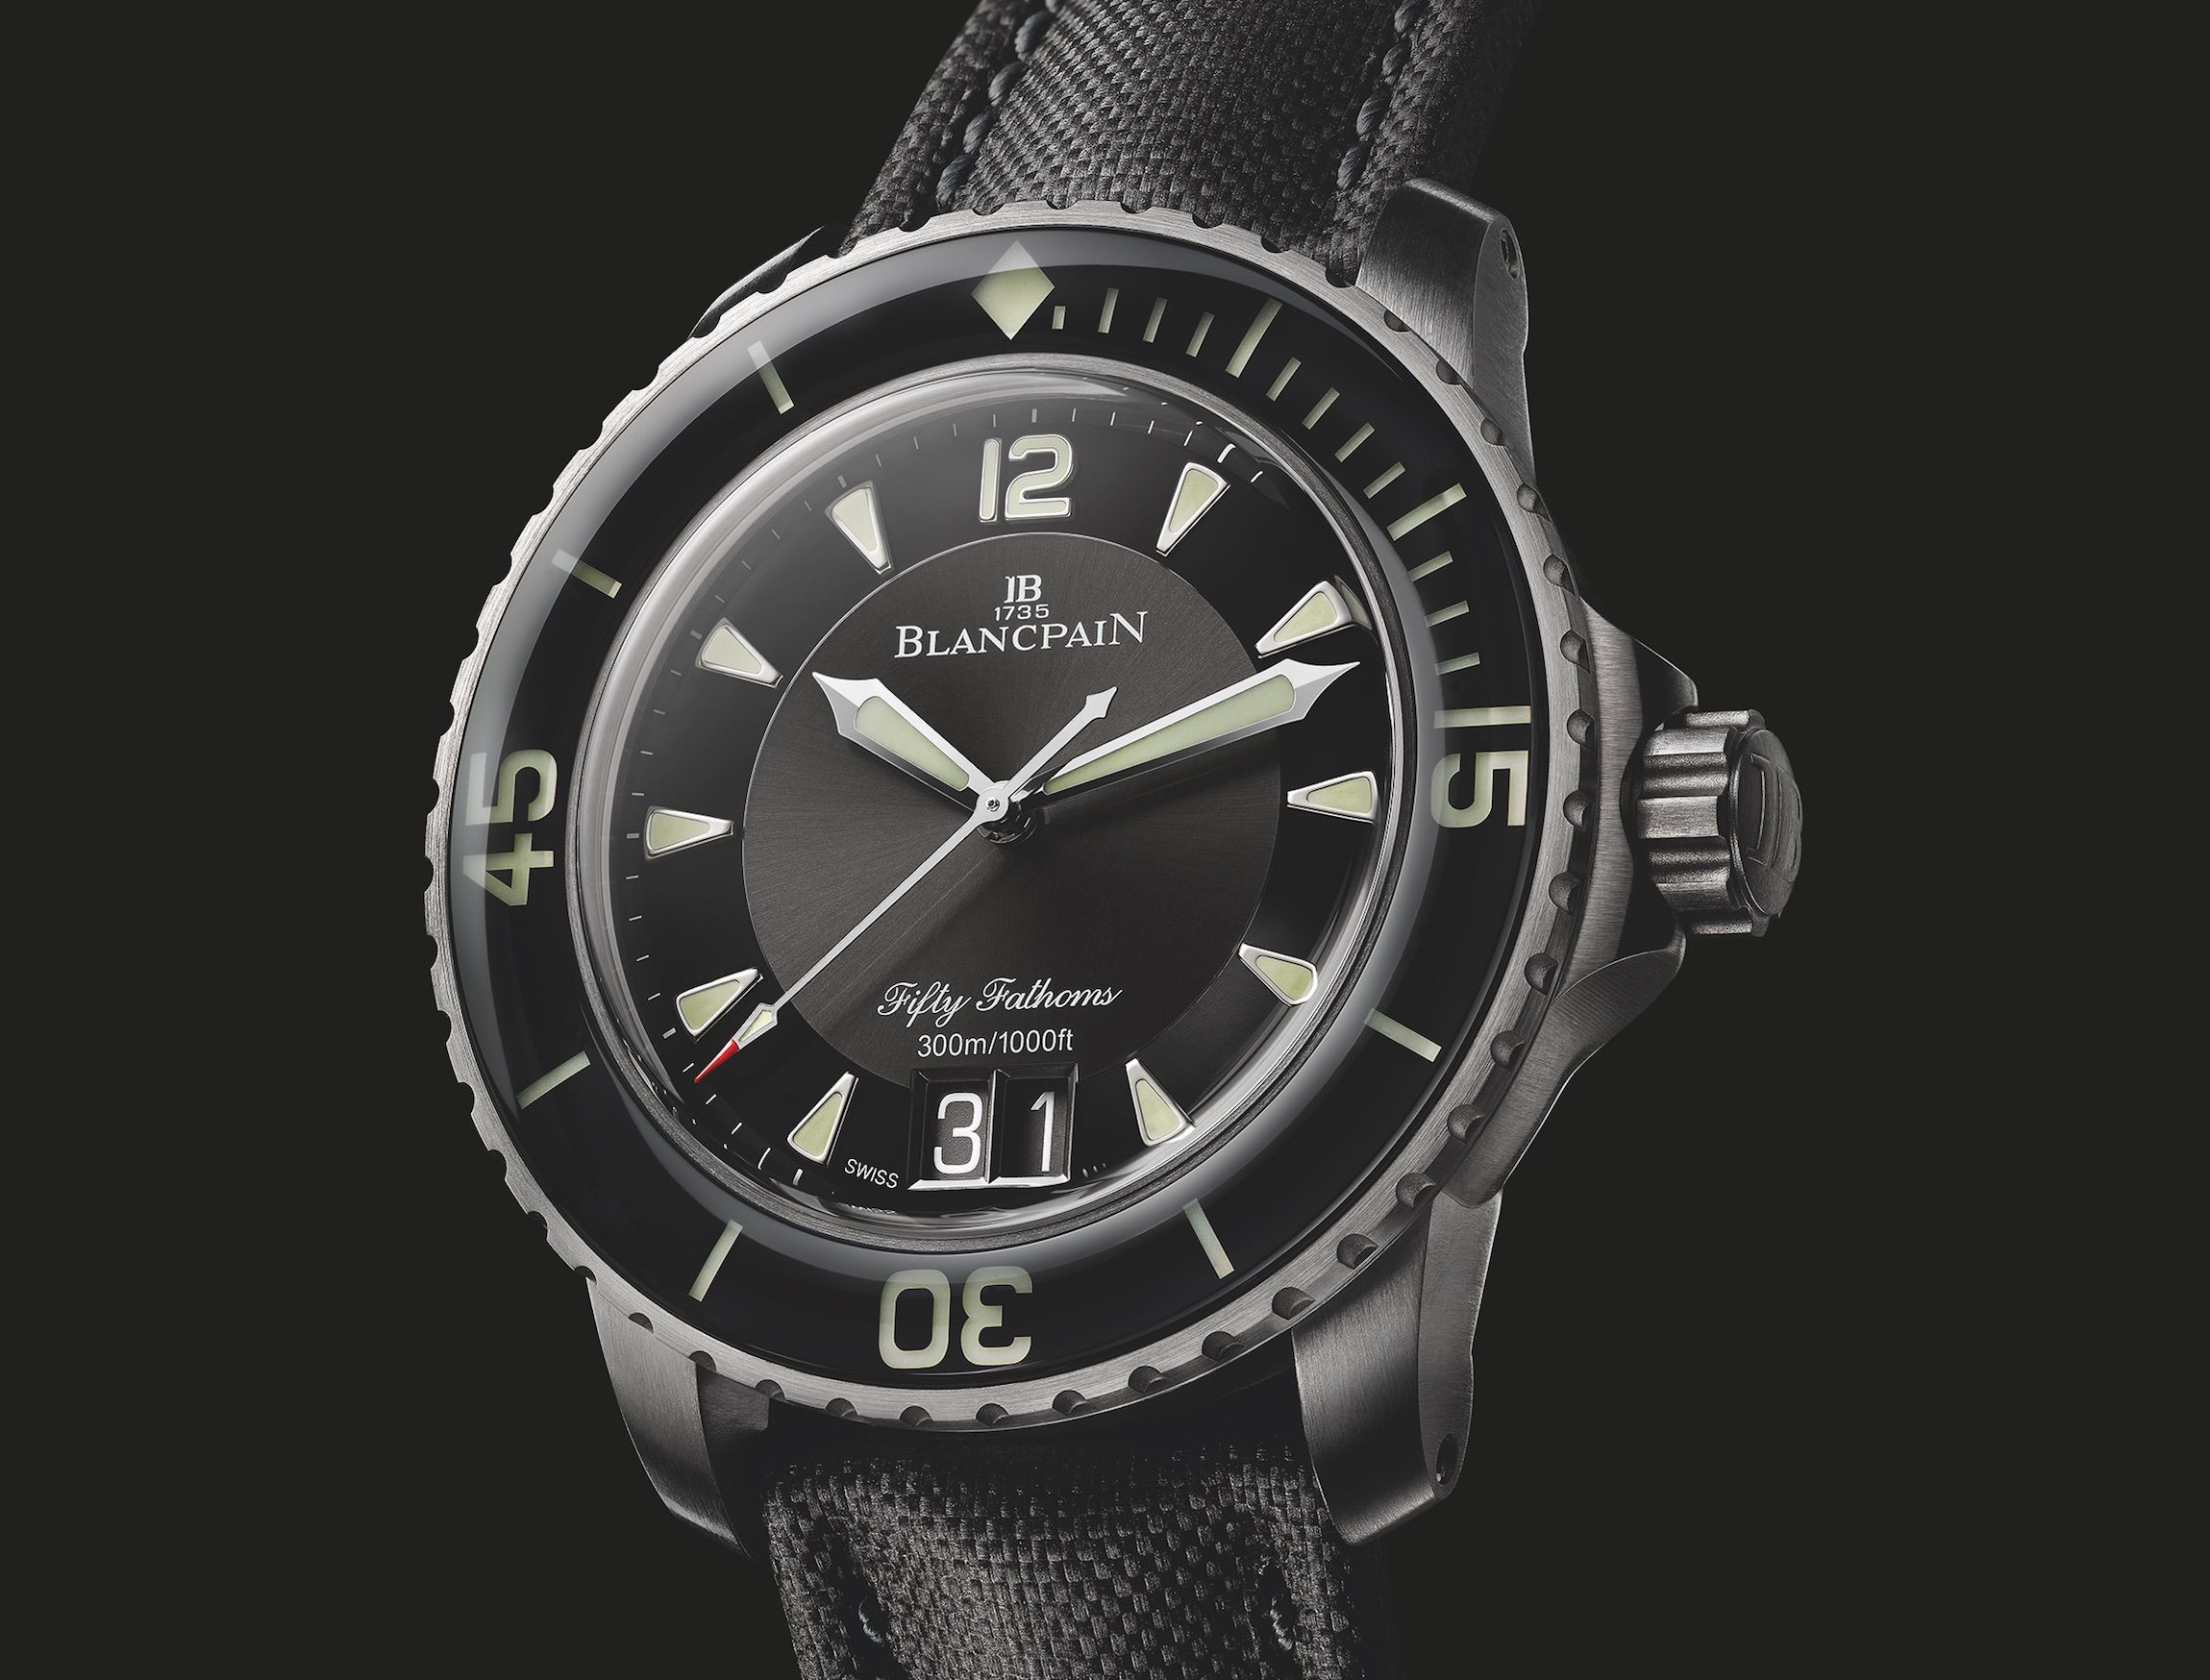 Tide & time: Blancpain makes waves in eco-friendly haute horology